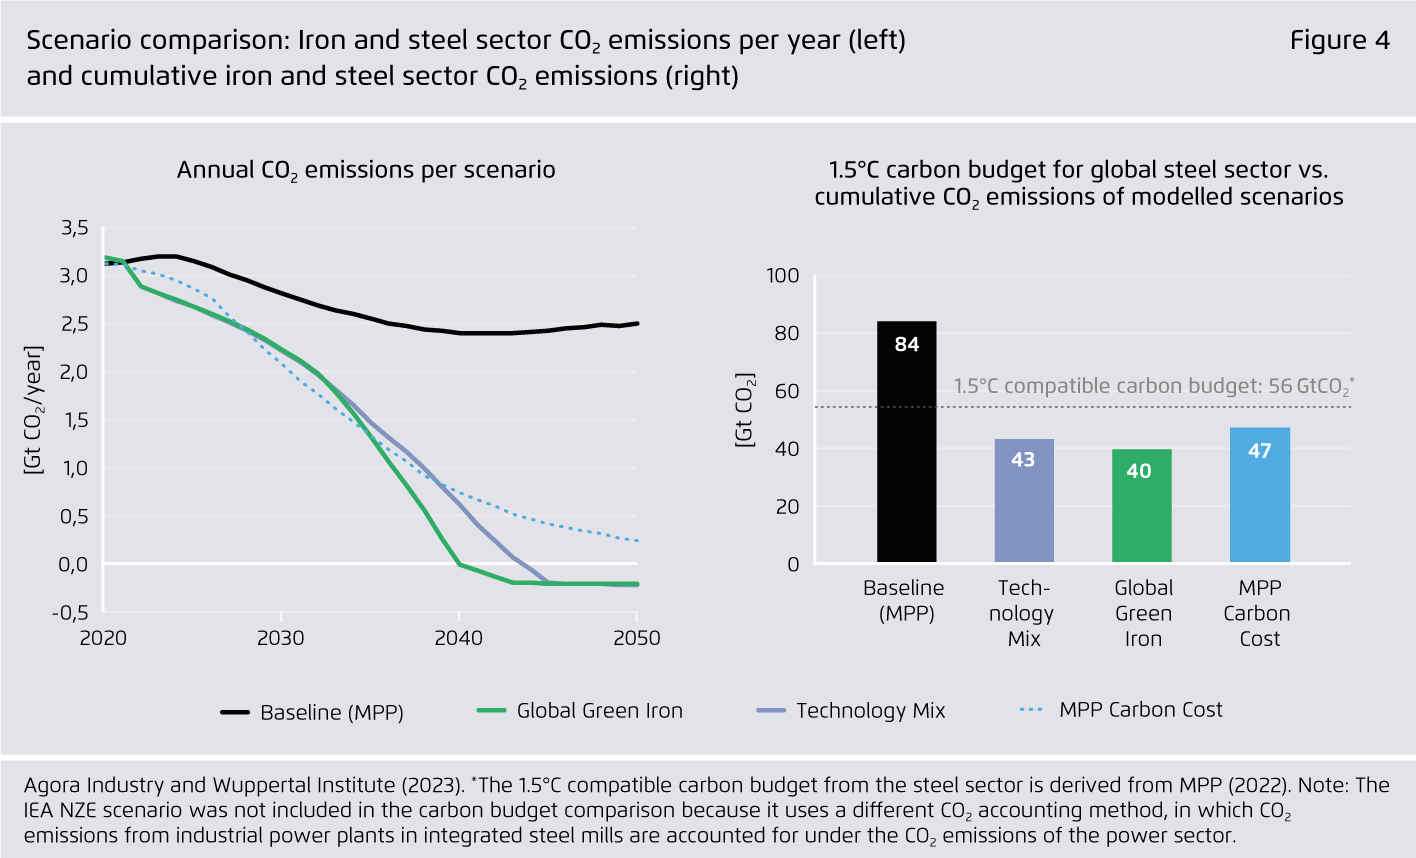 Preview for Scenario comparison: Iron and steel sector CO₂ emissions per year (left) and cumulative iron and steel sector CO₂ emissions (right)